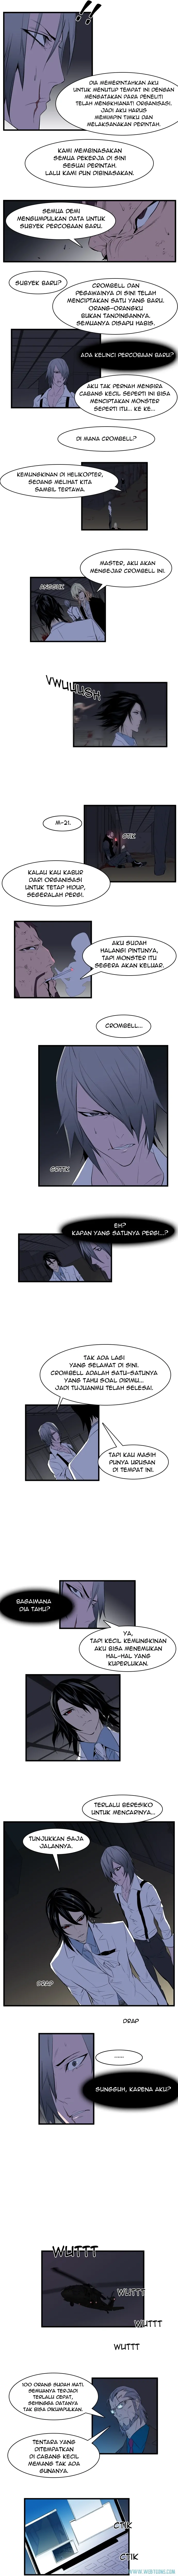 Noblesse Chapter 86 - 29